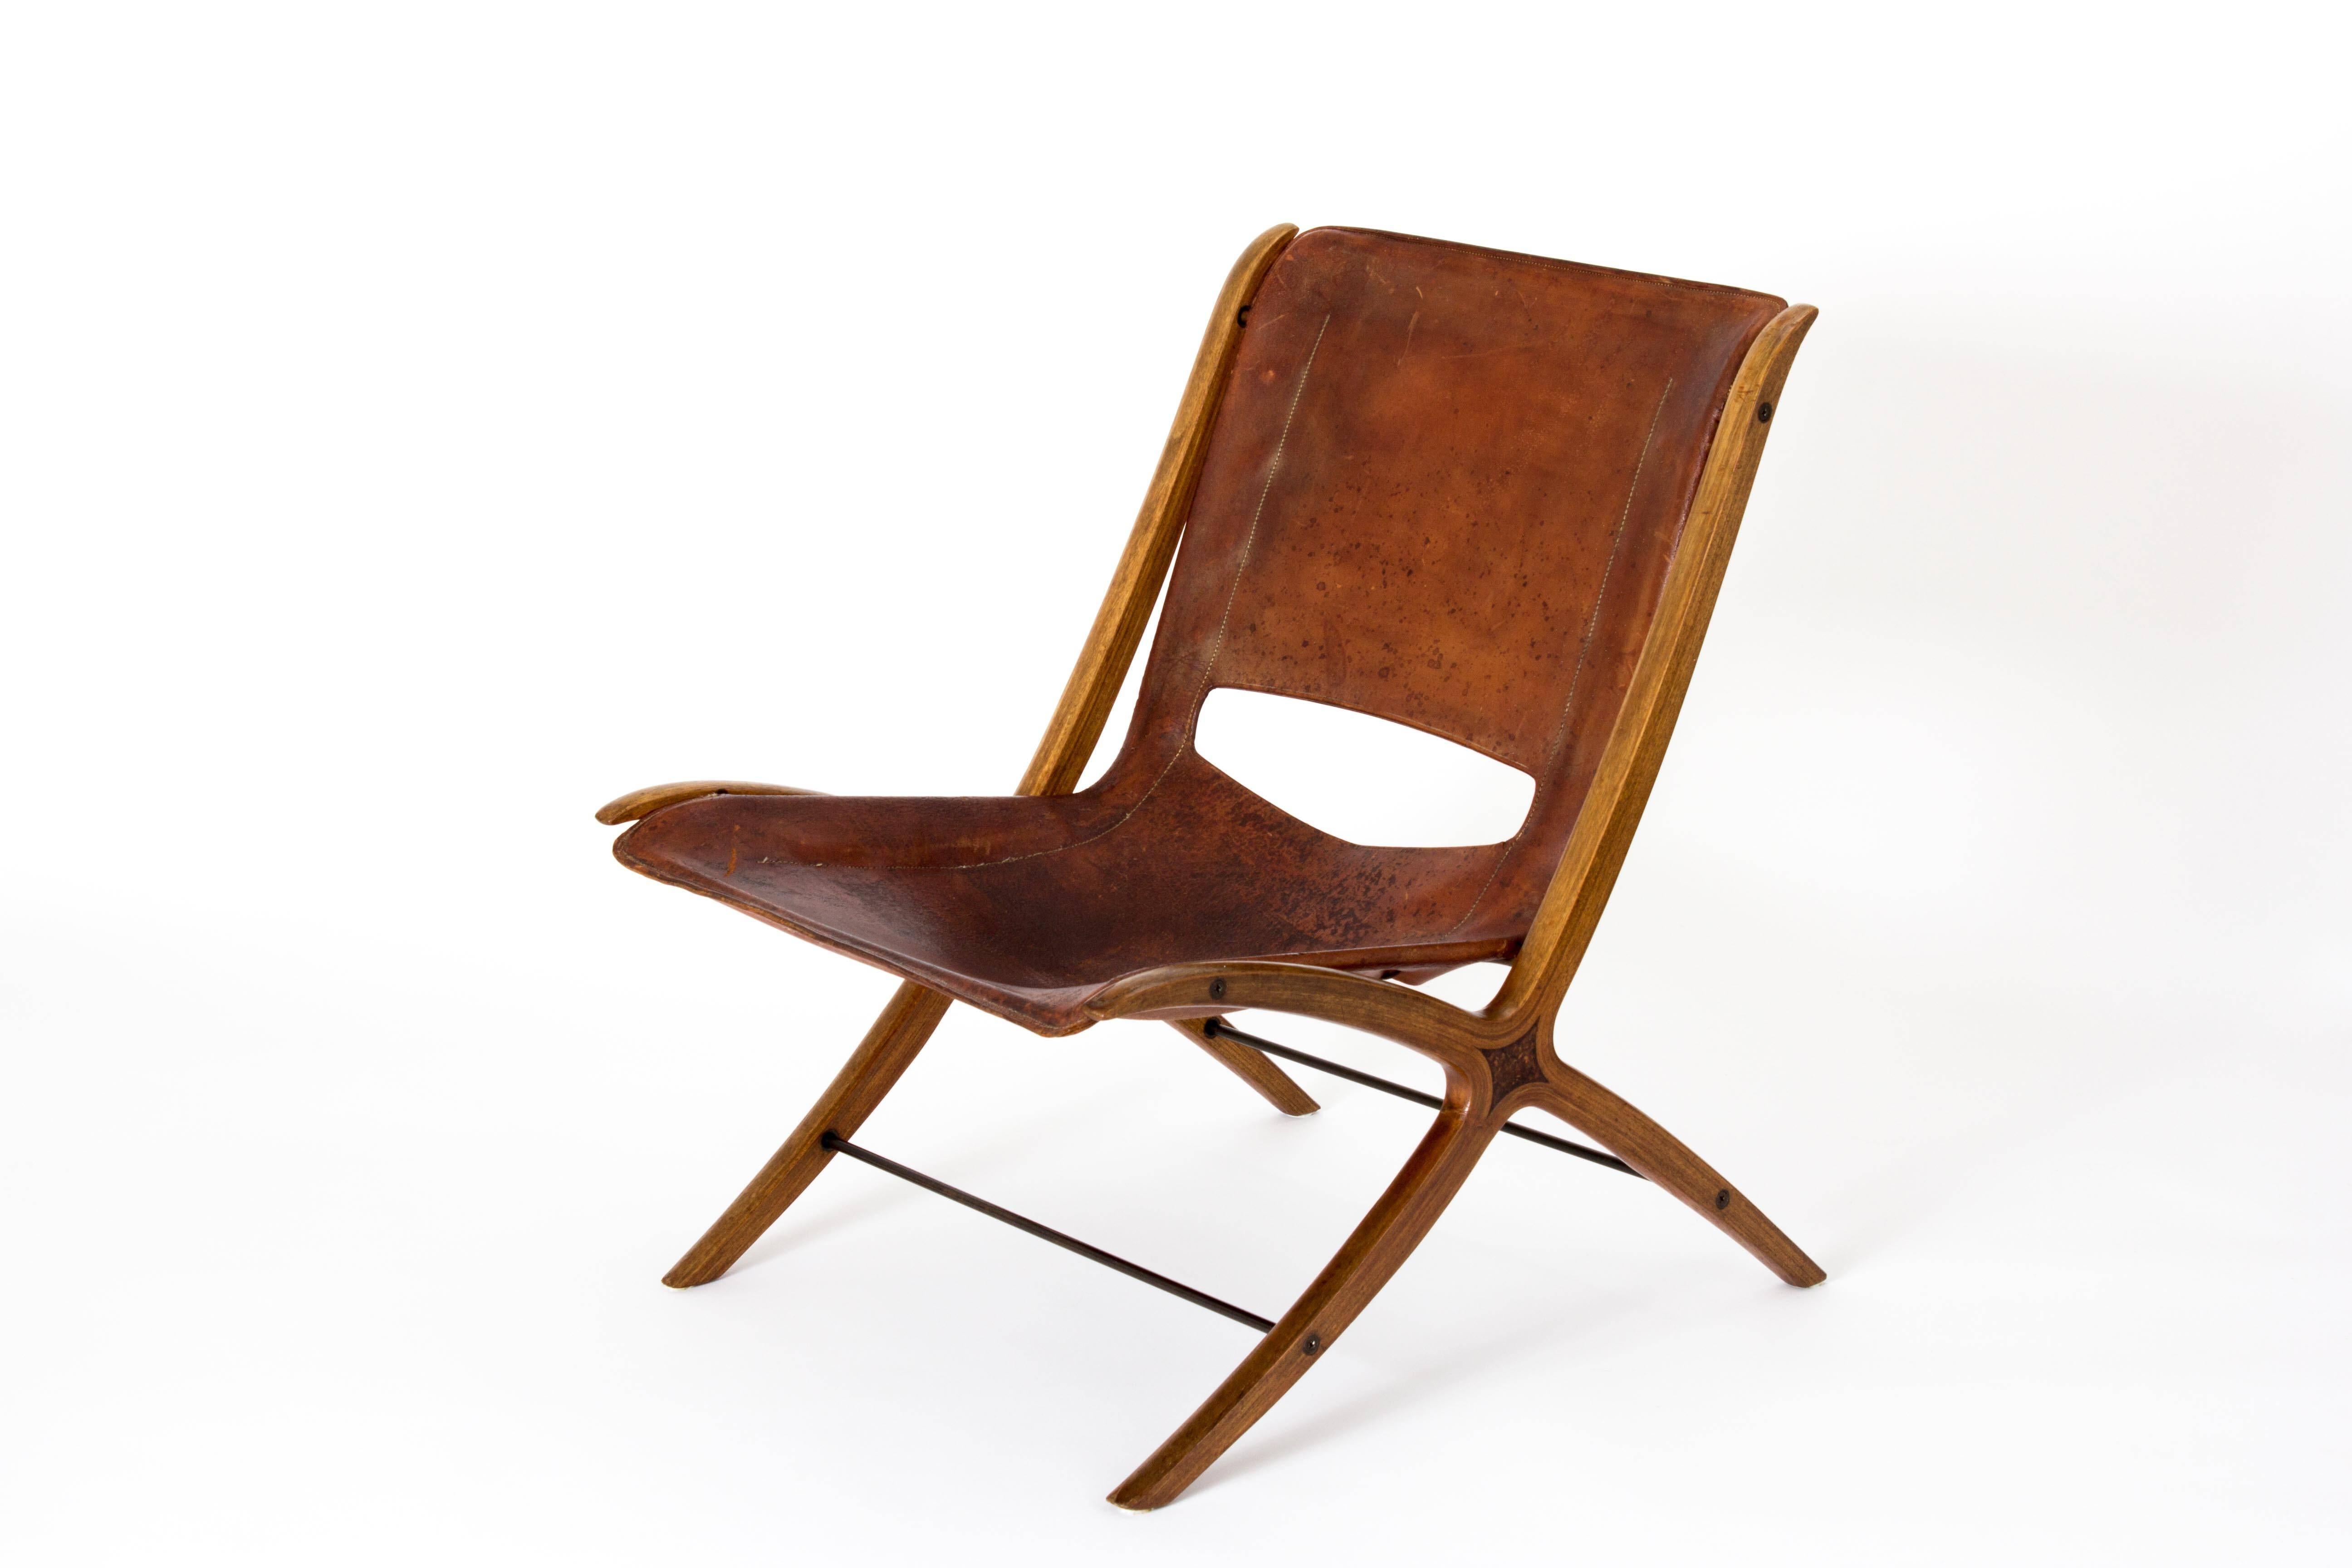 Rare easy chair or X-chair designed by Peter Hvidt & Orla Mølgaard-Nielsen in leather, mahogany. Produced by Fritz Hansen in Denmark, 1950s-1960s.

This chair has aged as beautifully as Helen Mirren. It's battered and scarred but the aging and